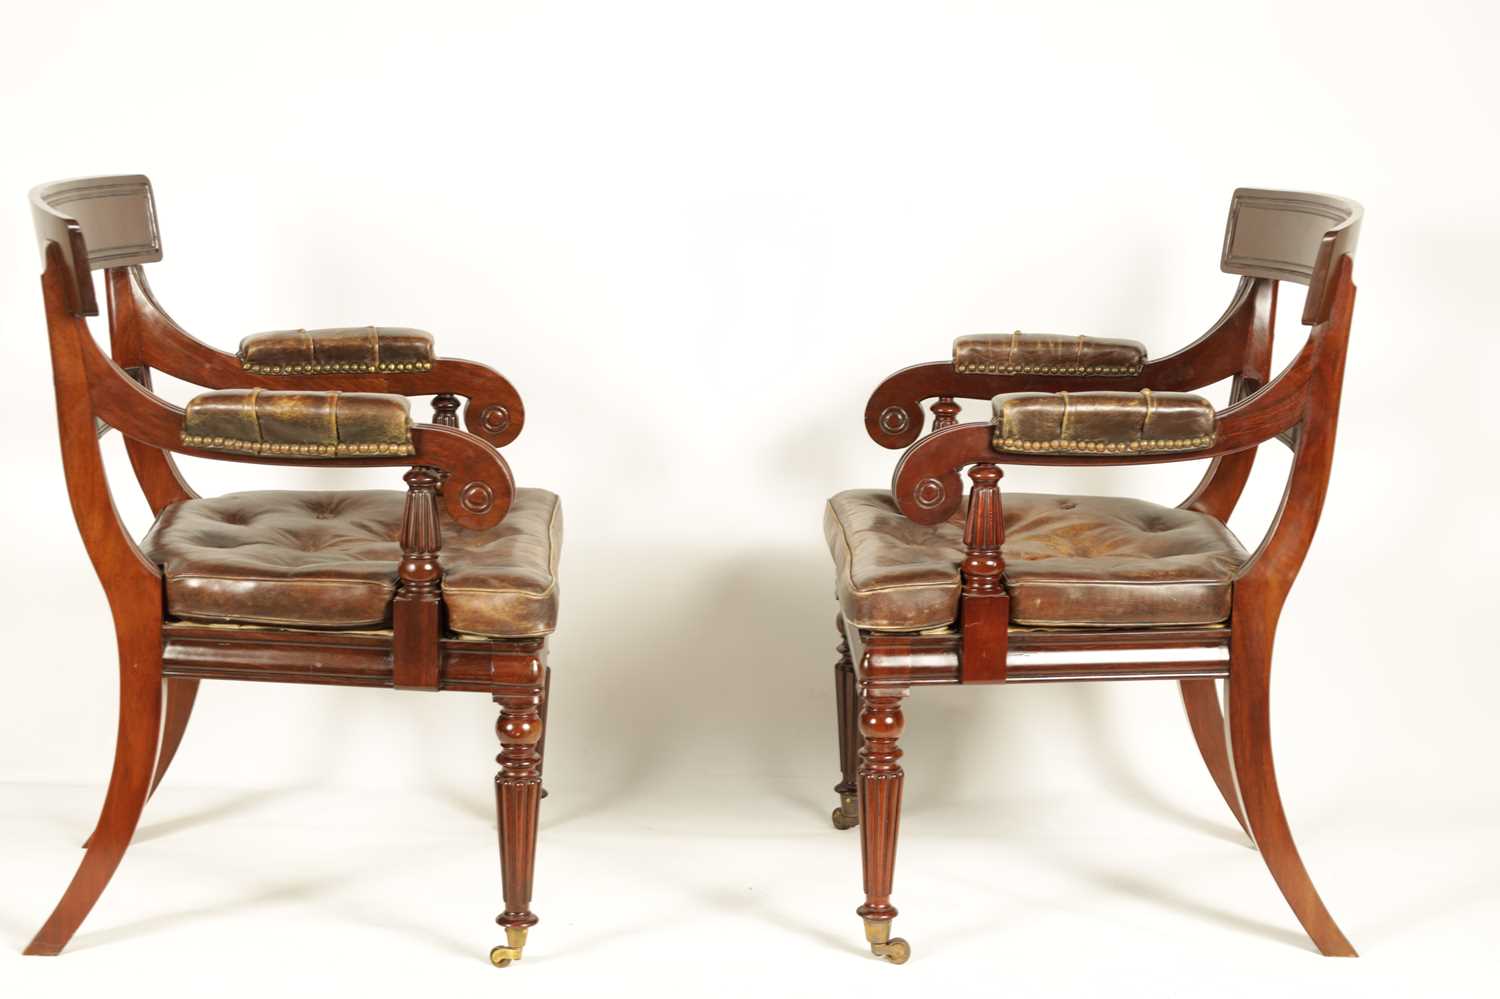 A GOOD PAIR OF REGENCY STYLE MAHOGANY DESK CHAIRS IN THE MANNER OF GILLOWS - Image 7 of 10